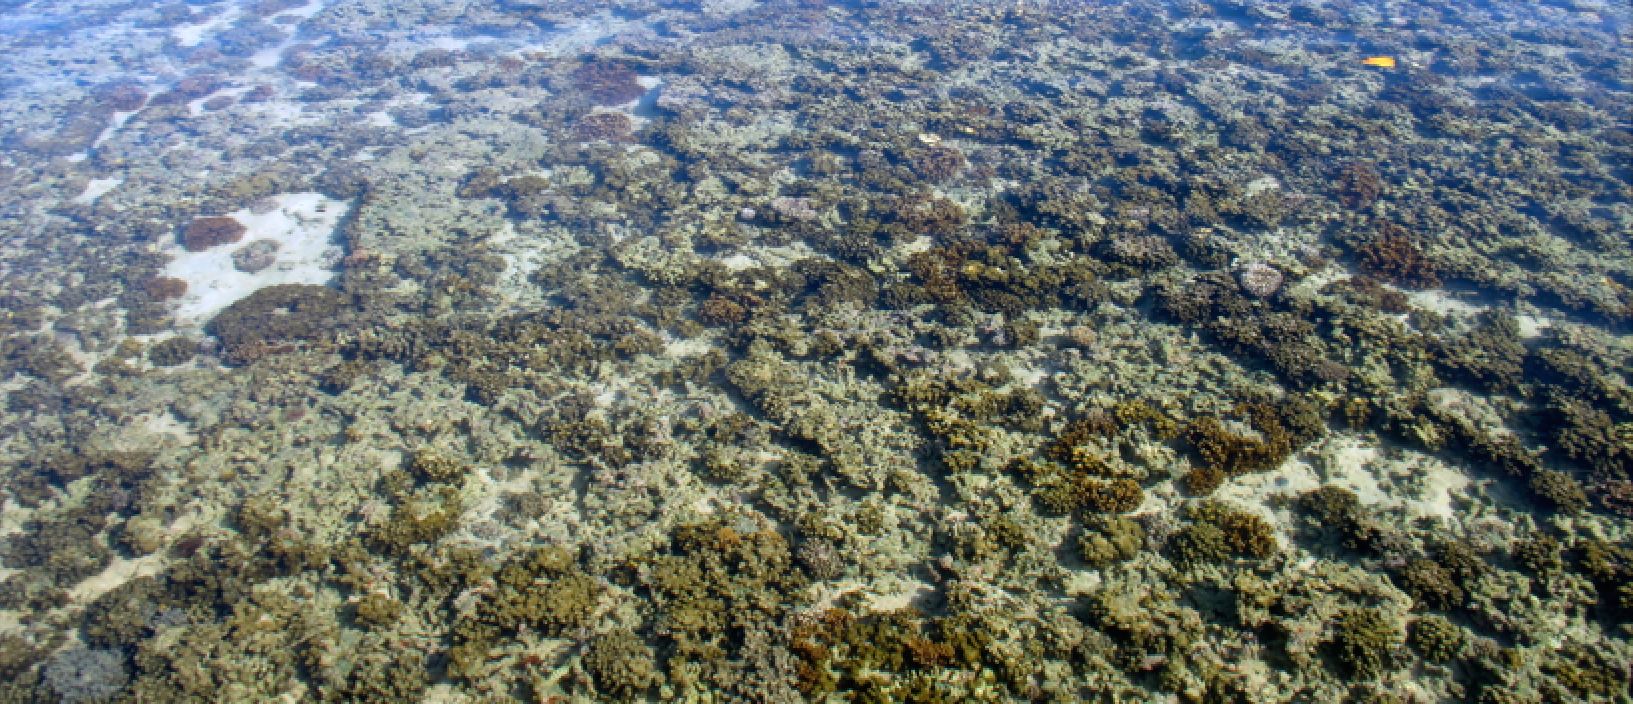 Coral reef resilience in the face of anthropogenic impacts